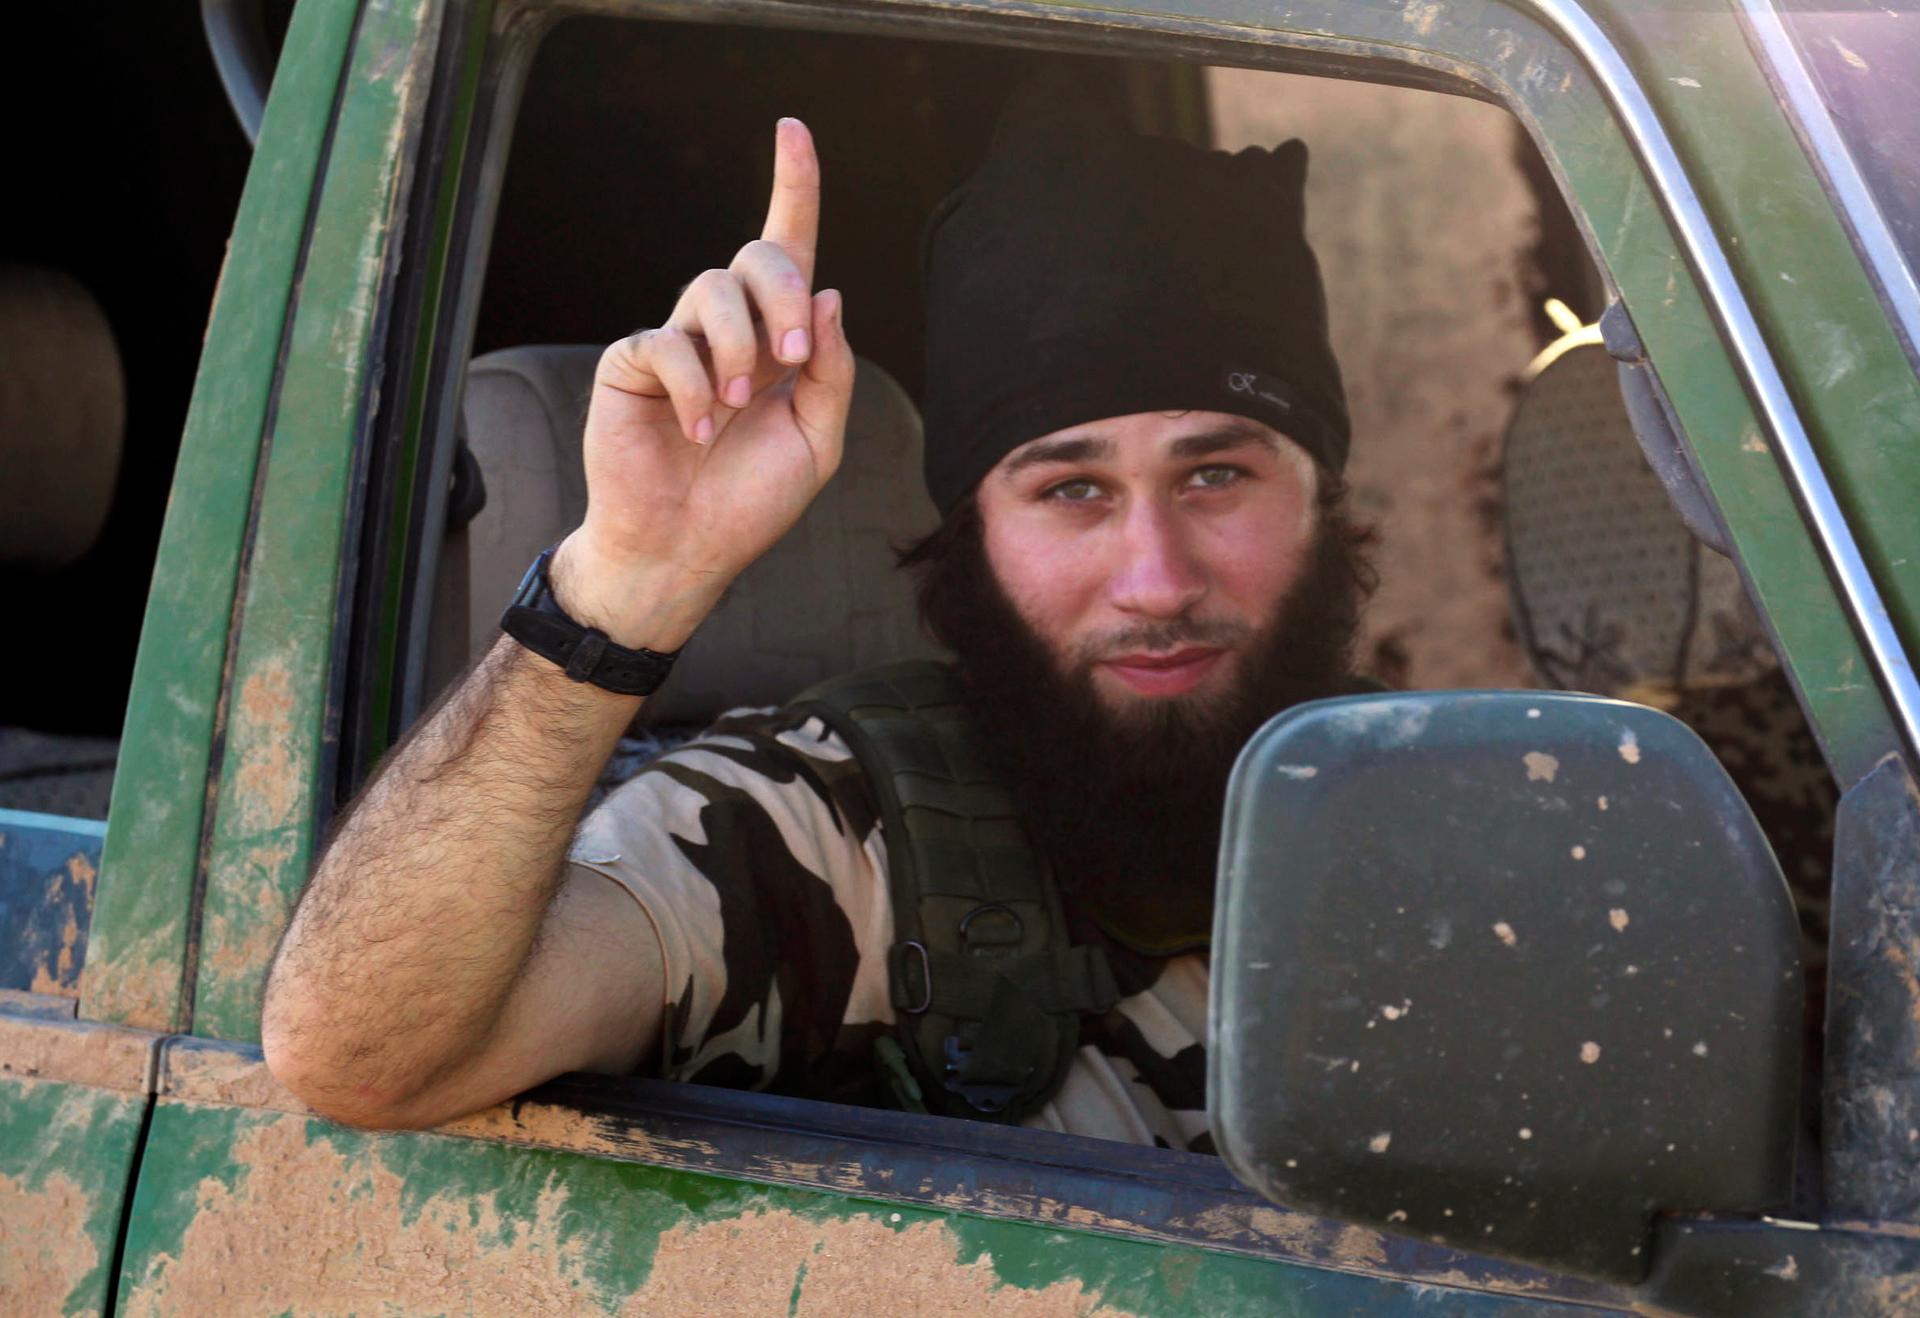 An Islamic State fighter gestures from a vehicle in the countryside of the Syrian Kurdish town of Kobani, after the Islamic State fighters took control of the area in October.